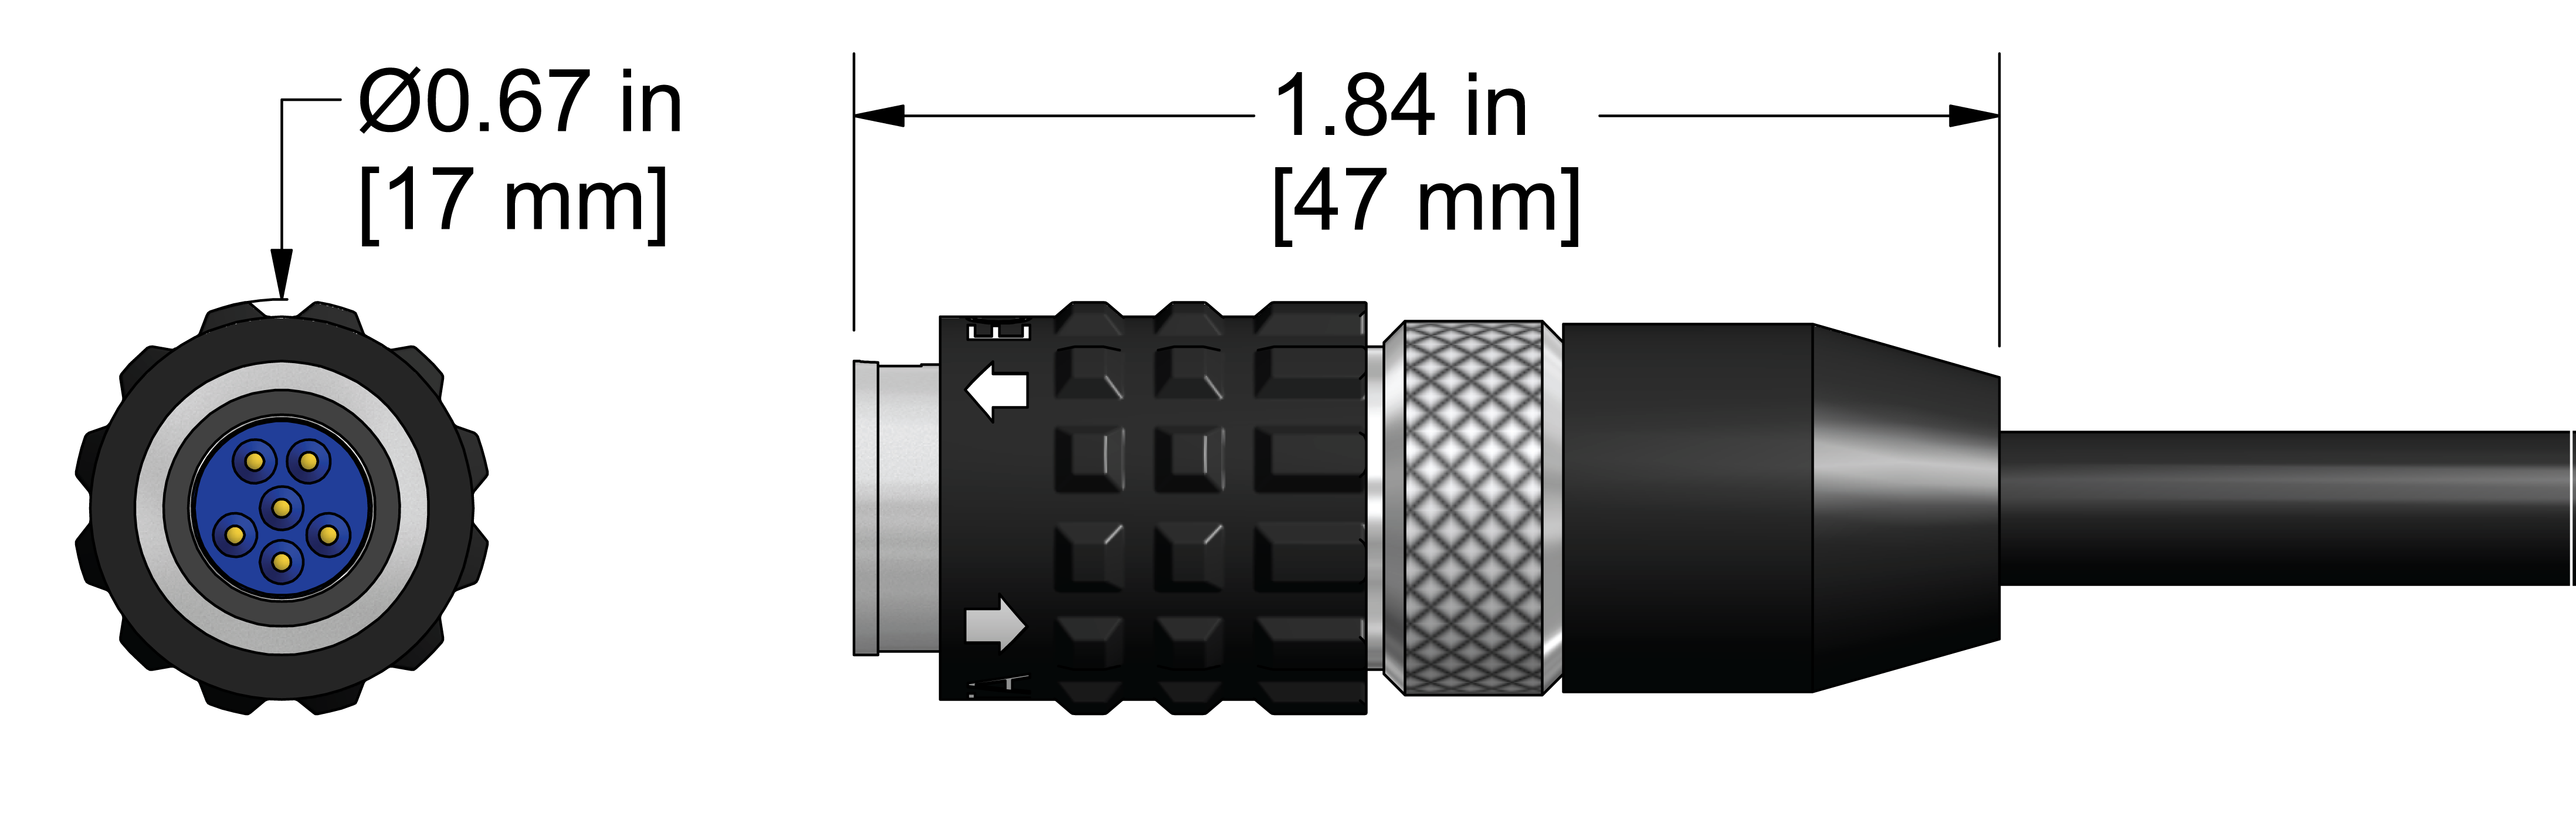 A line drawing showing the diameter and length of an assembled CTC C314 vibration sensor connector kit.